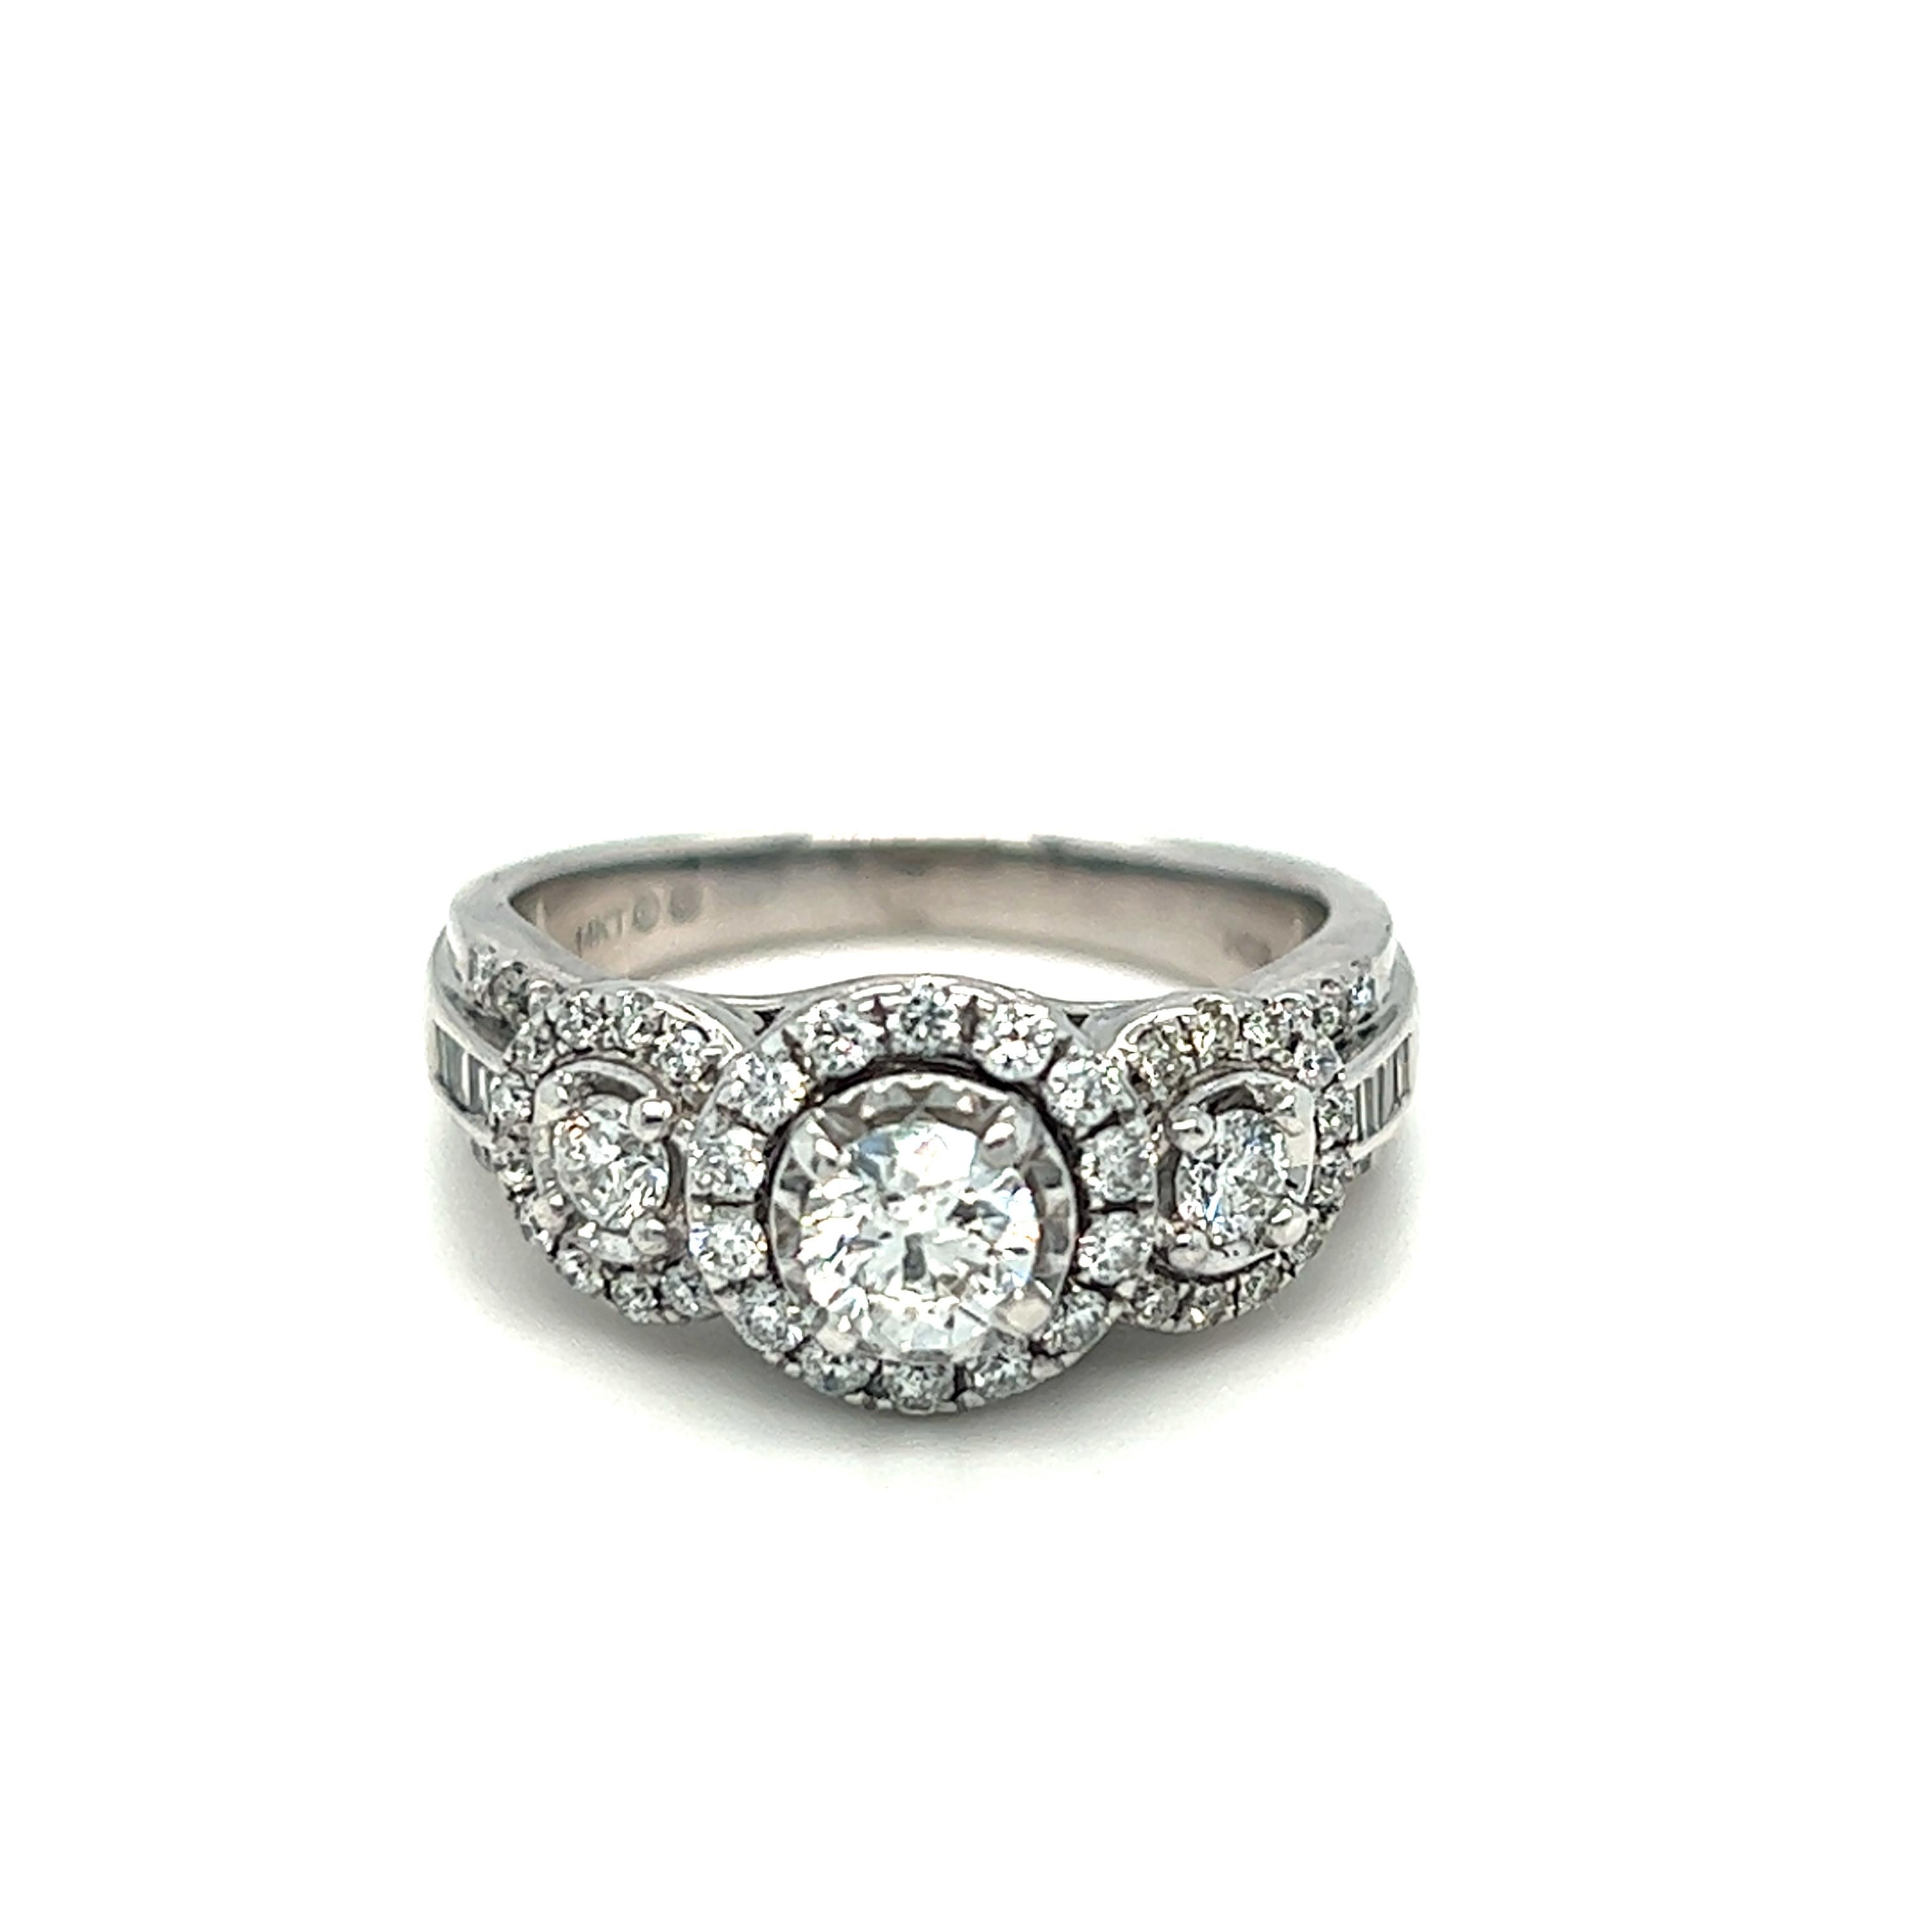 A beautiful diamond halo trilogy ring set in 14k white gold. The ring is centrally set with a round brilliant cut diamond which is claw set in an open back setting. The diamond is then flanked to each side by two perfectly matched round cut